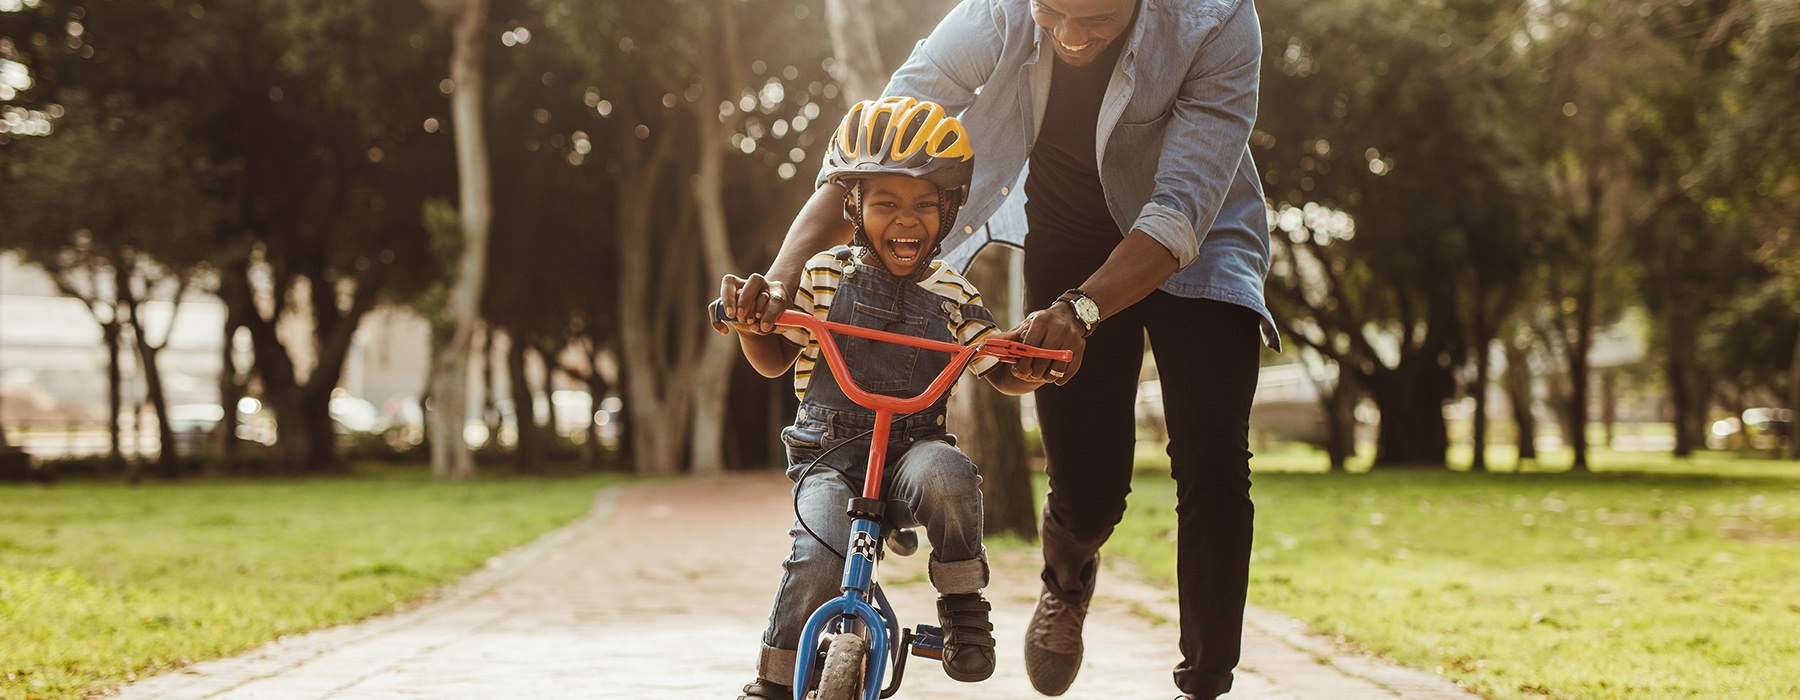 Father and child riding a bike in the park 